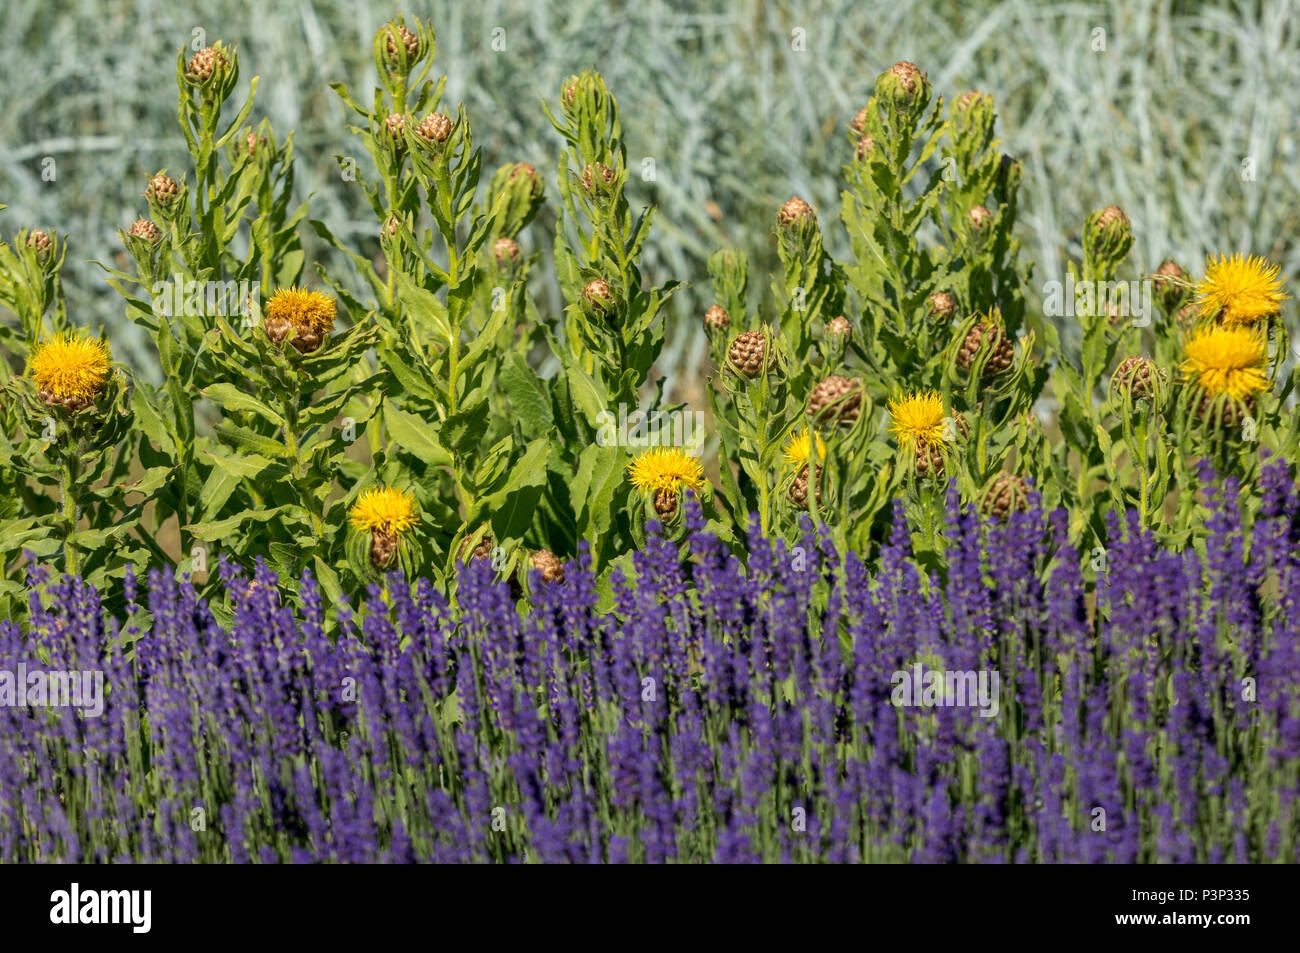 the flourishing lavender and yellow star-thistle flowers Stock Photo